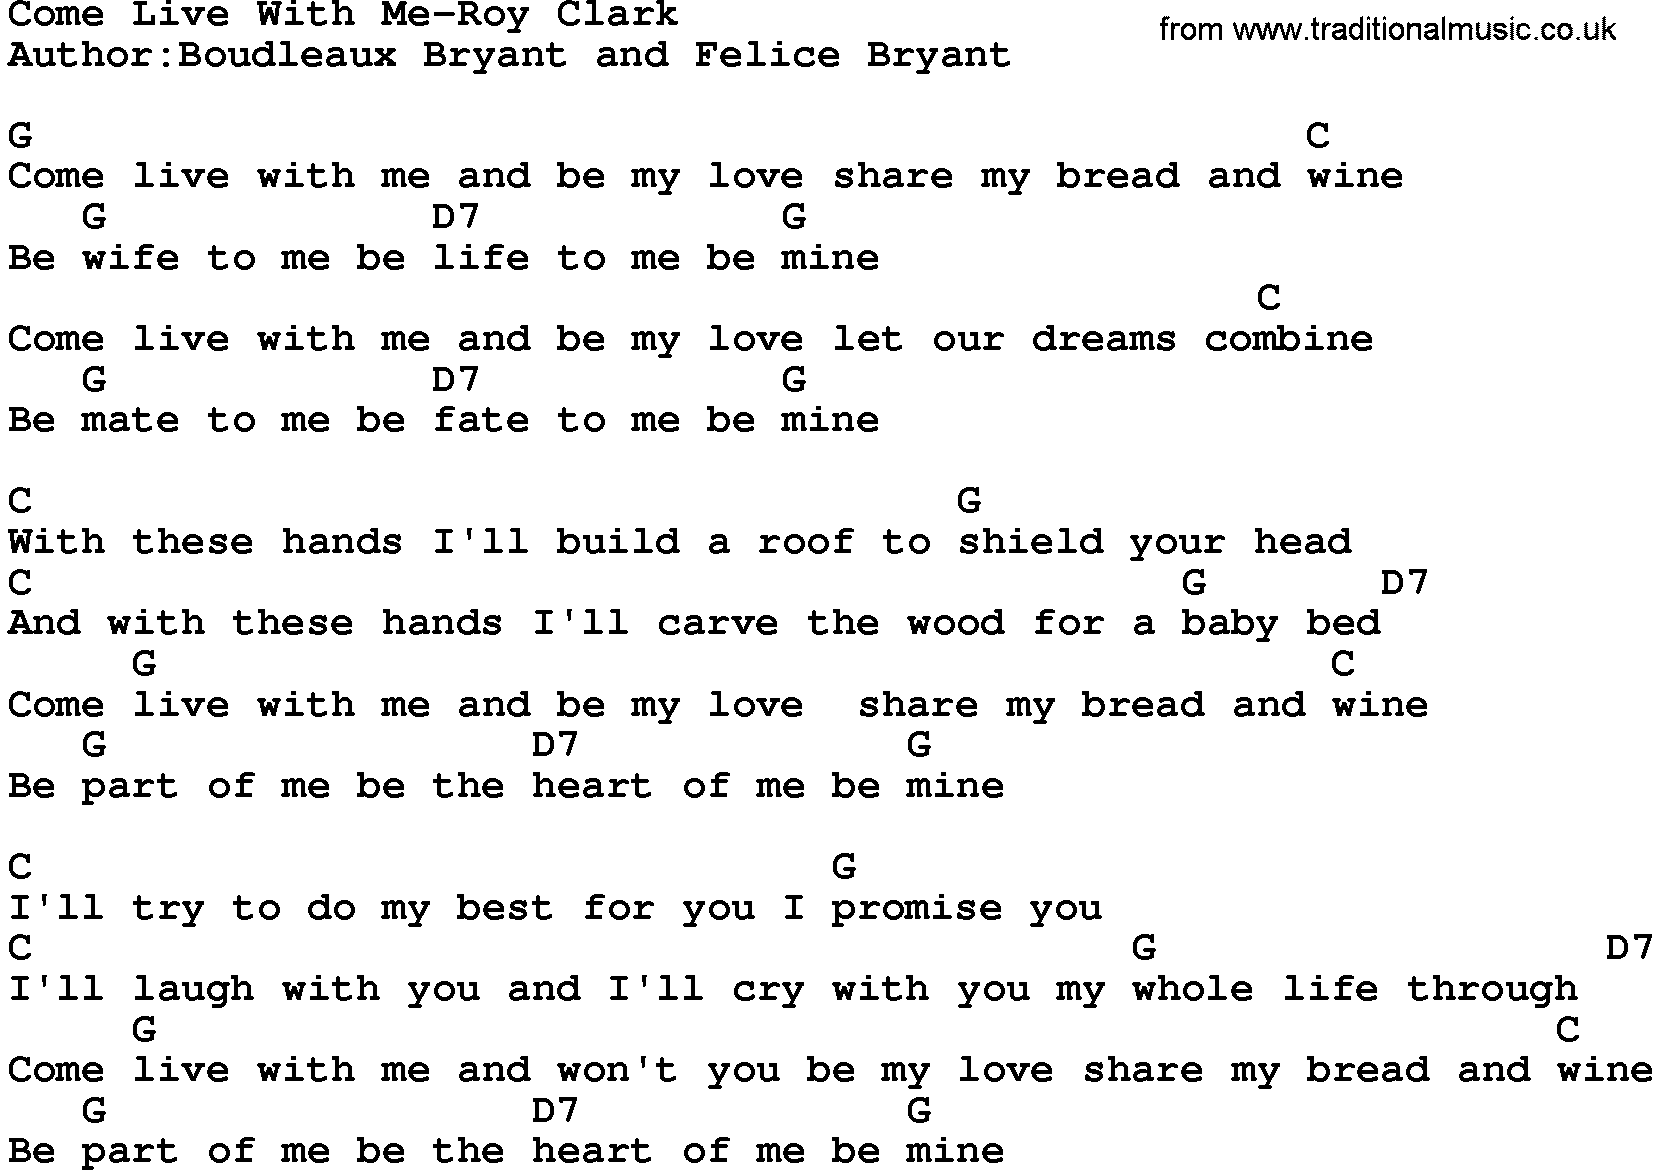 Country music song: Come Live With Me-Roy Clark lyrics and chords